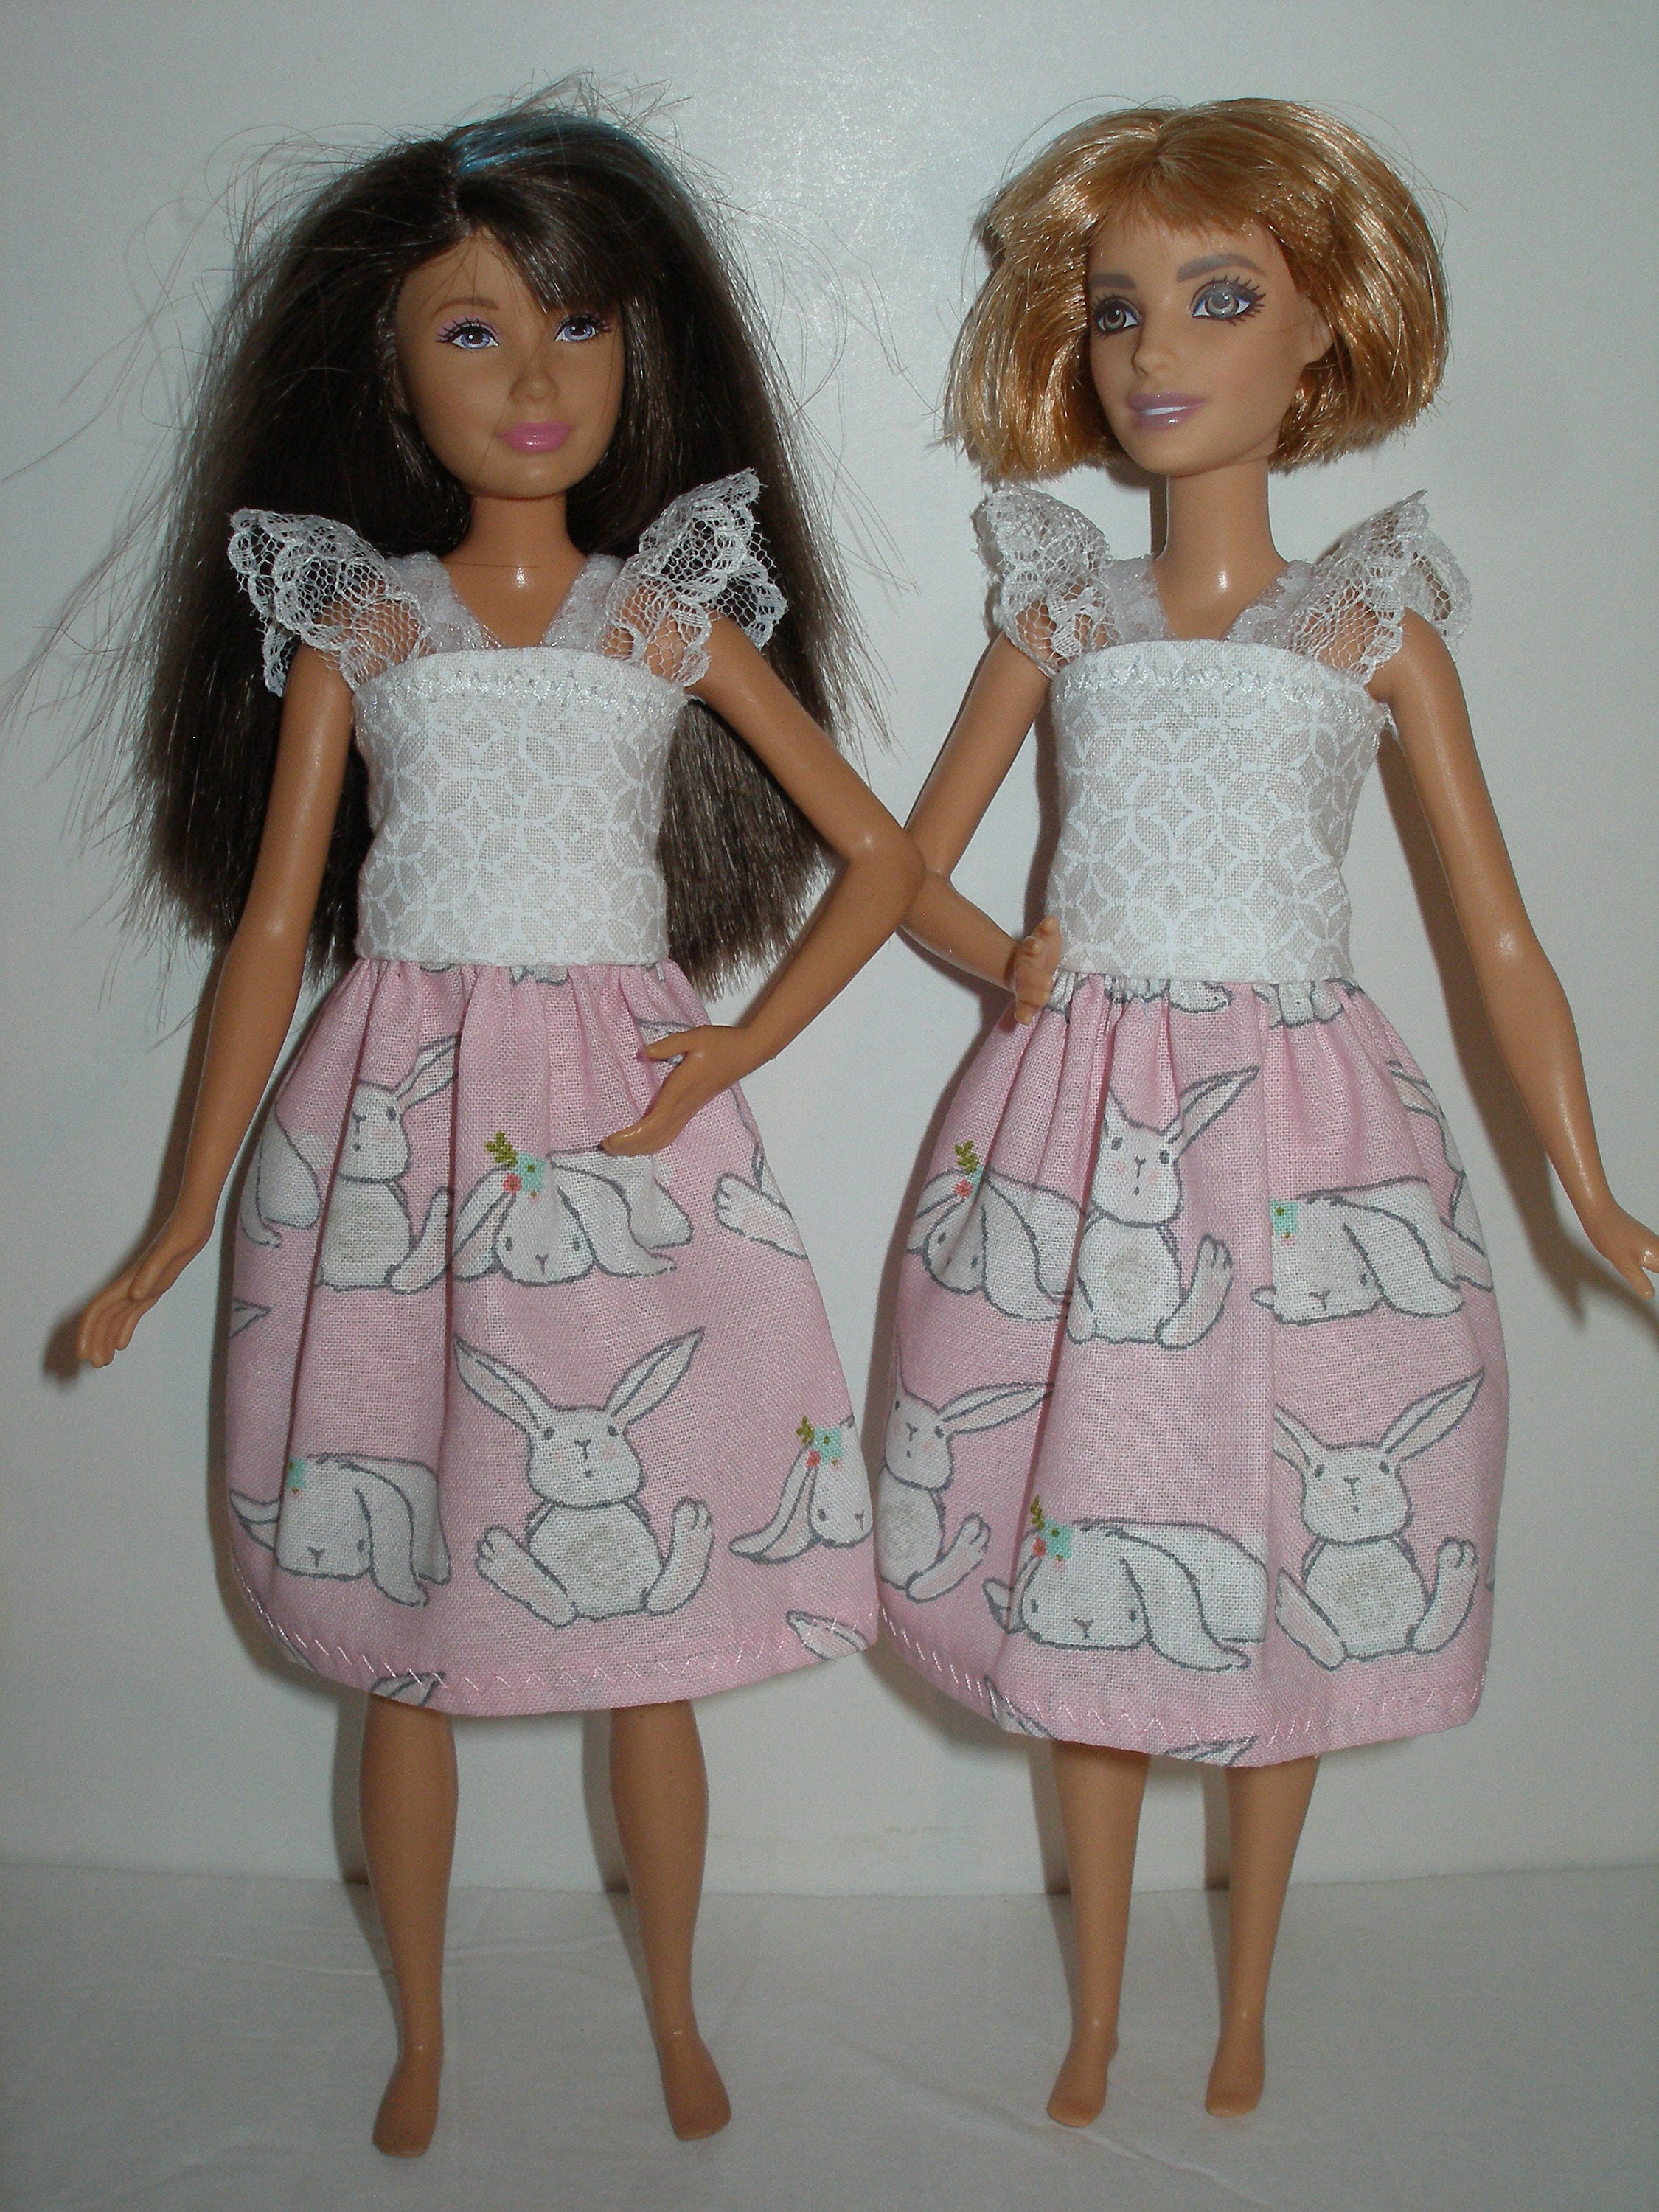 Handmade 10.5 teen fashion doll clothes such as Skipper, Petite and Moxie  - Pink and White Rabbit Dress